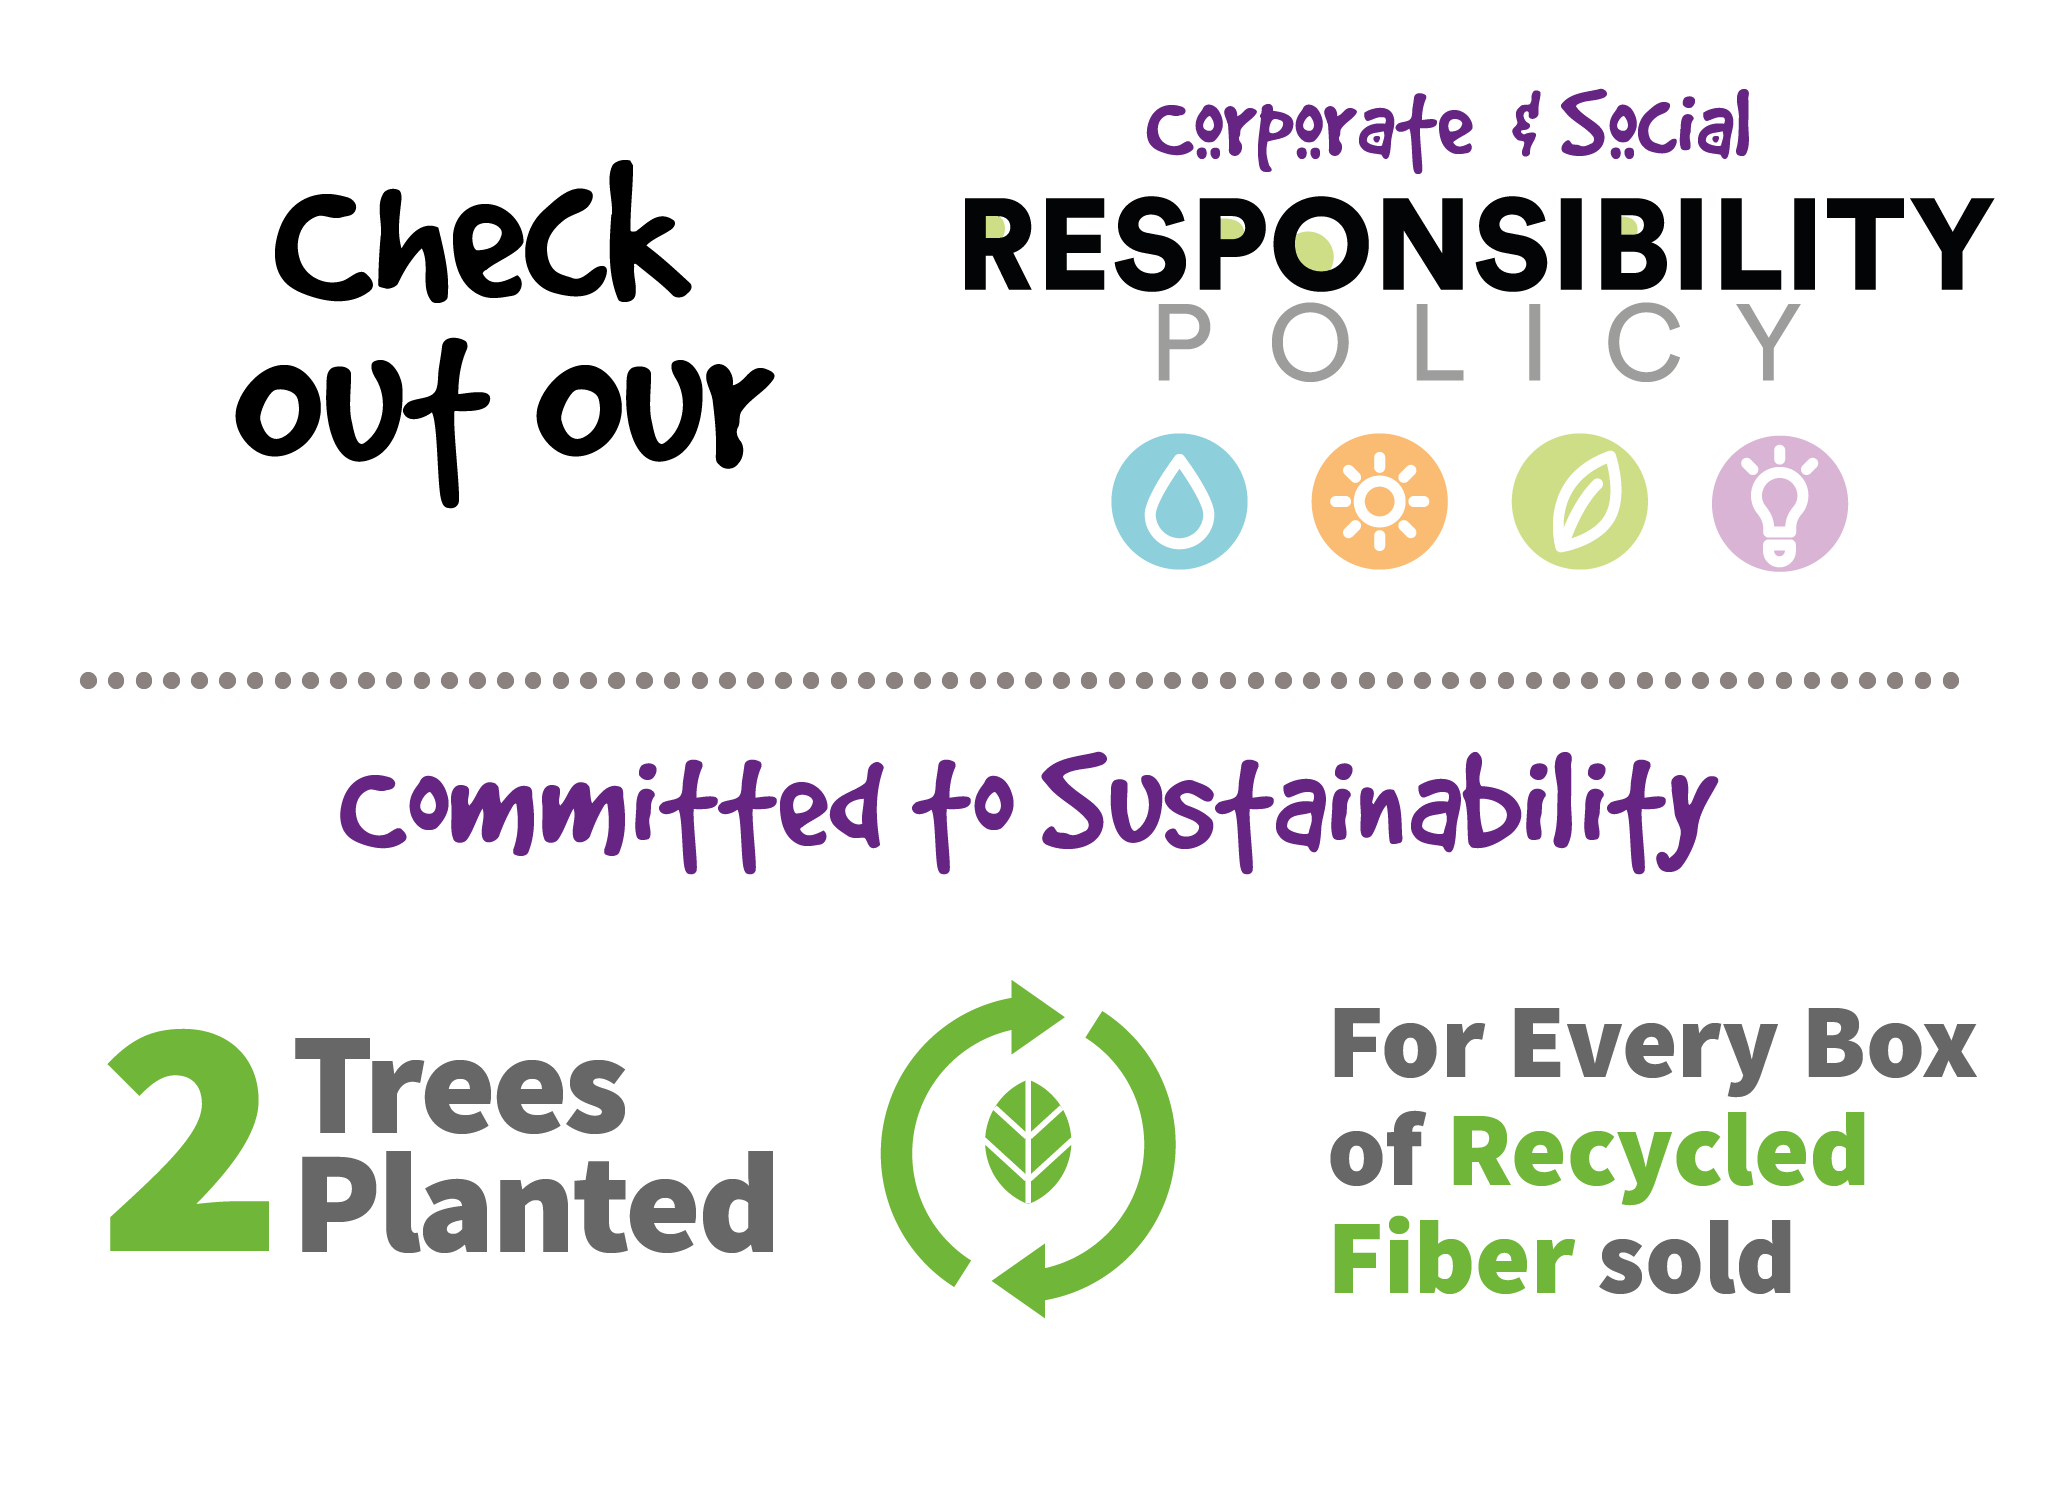 Check out our corporate and social responsibility policy. Committed to sustainability. 2 trees planted for every box of recycled fiber sold.